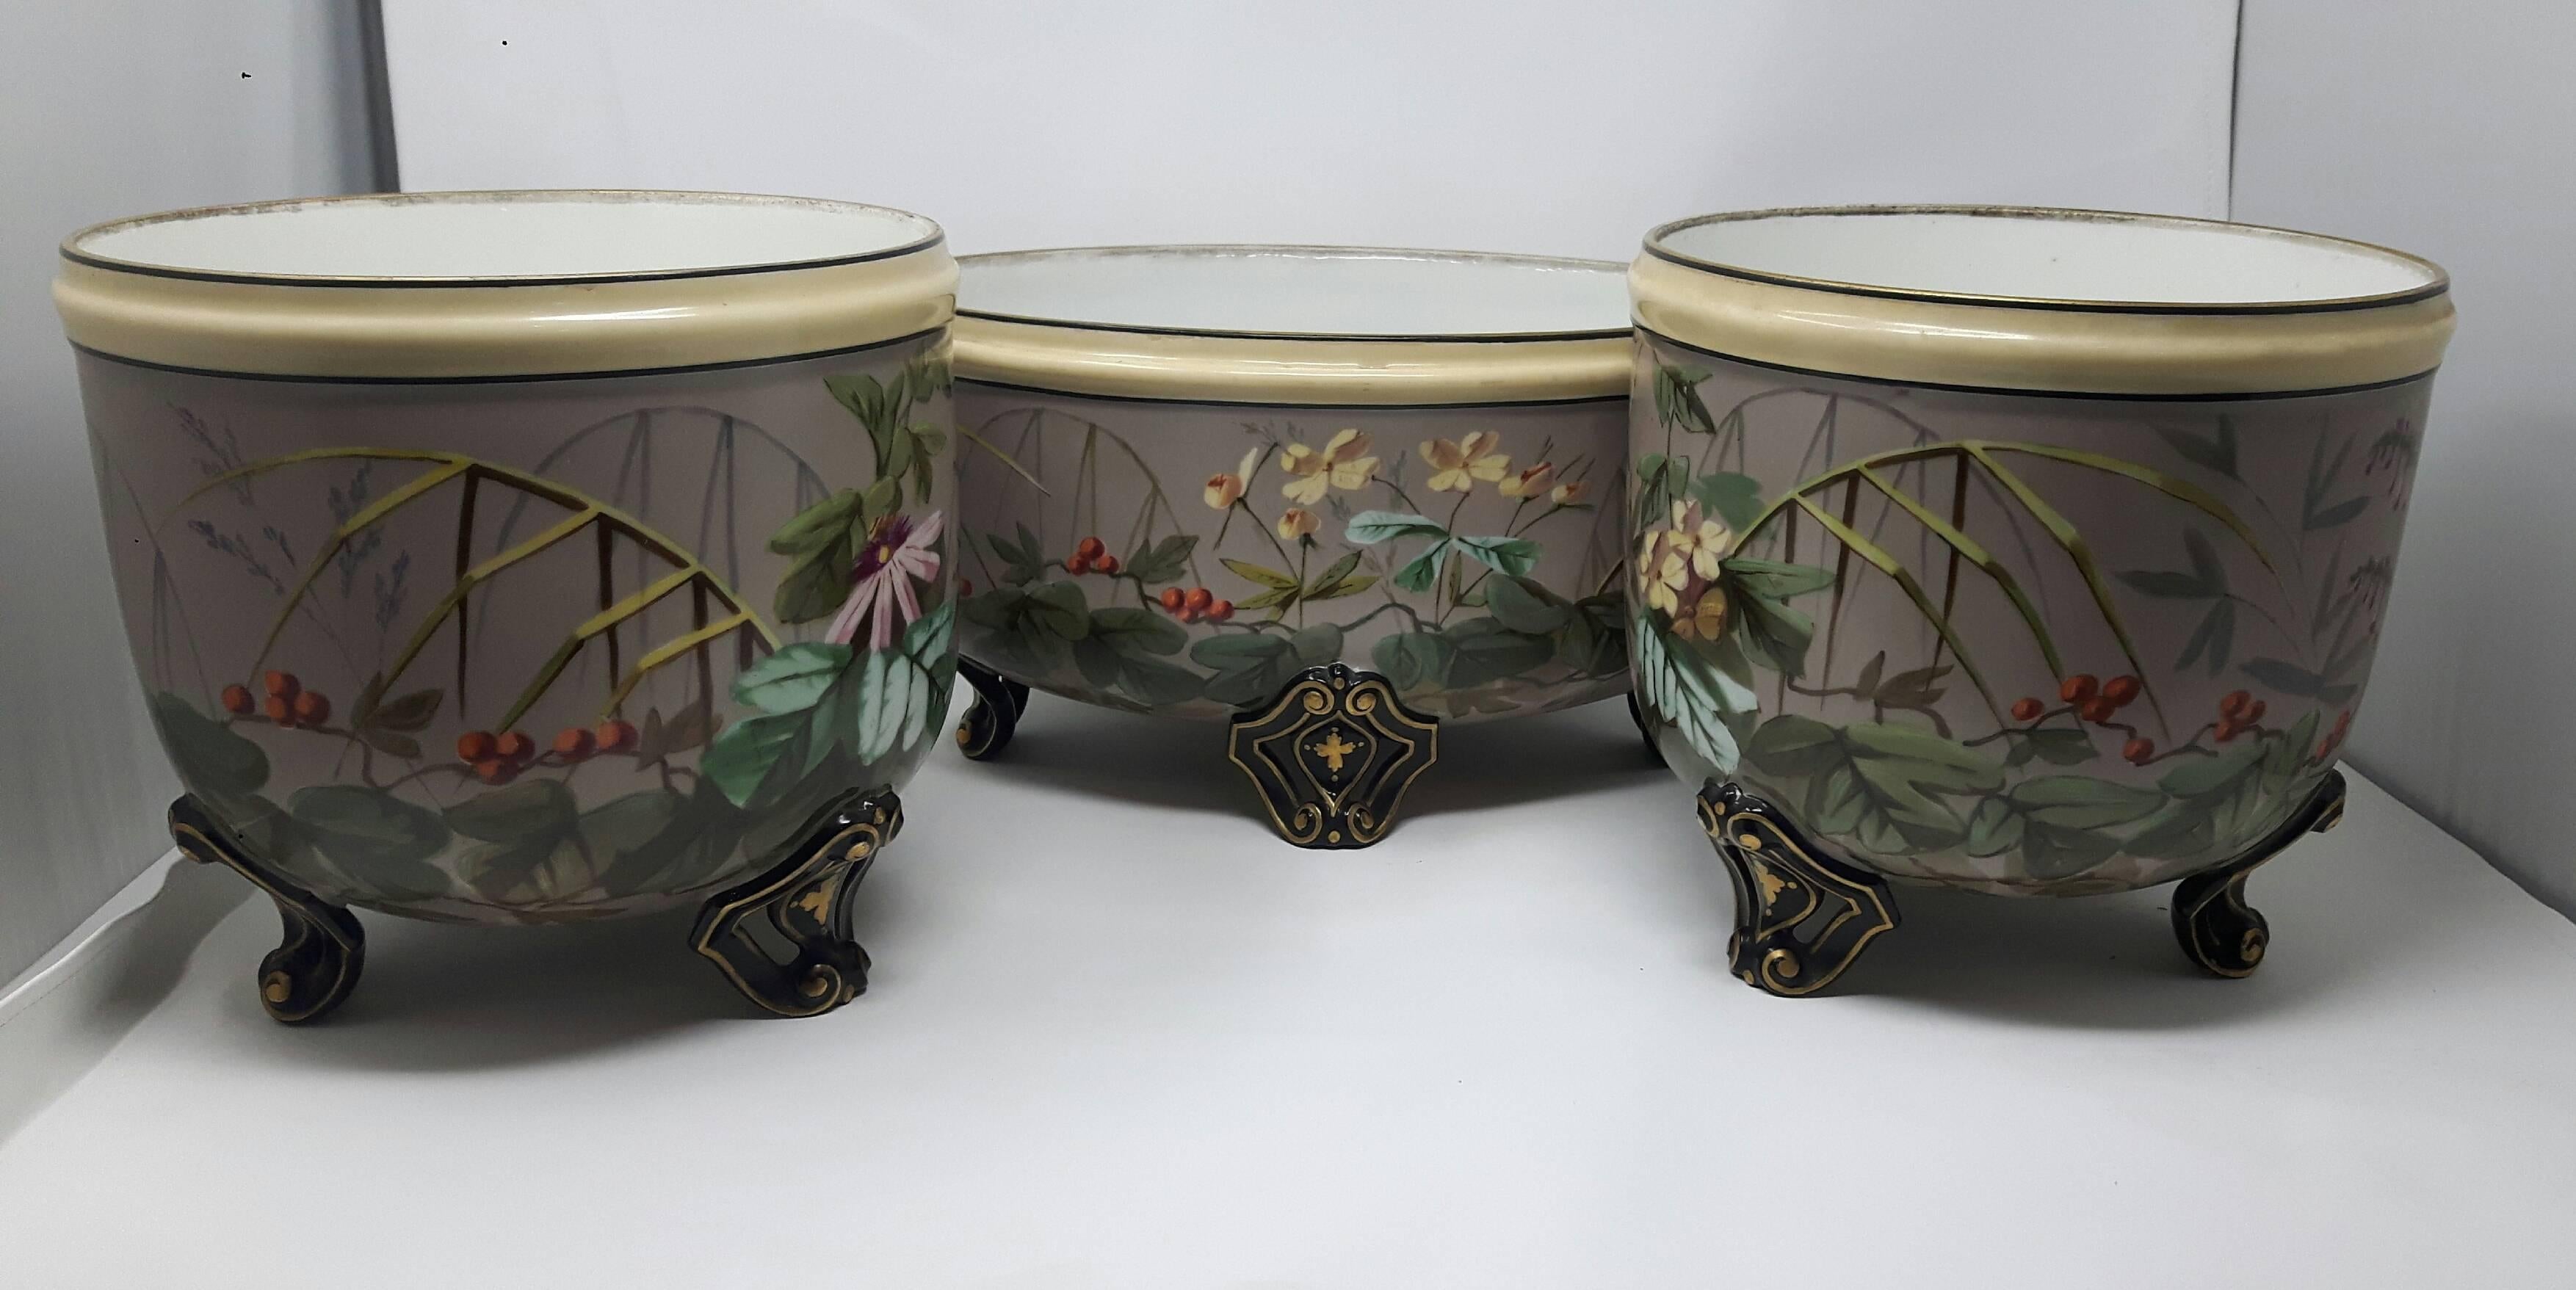 19th century French garniture with a rare platinum ground painted with exotic birds and flowers.